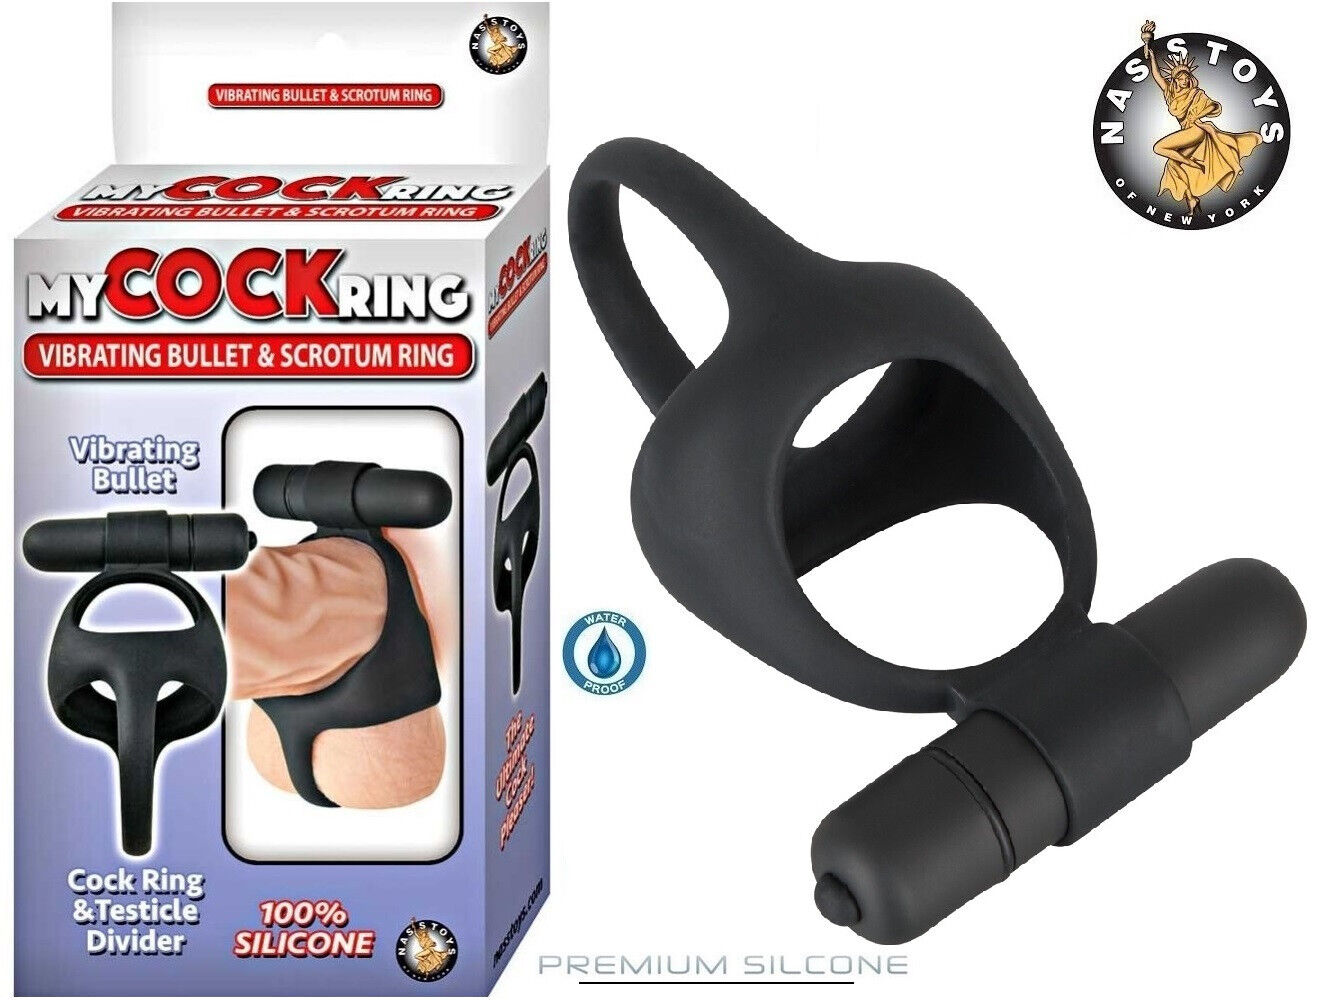 Vooruitzien Correspondent wat betreft My Cock Ring Silicone Vibrating Bullet & Scrotum Ring Testical BALL DIVIDER  W/P 782631270907 | eBay